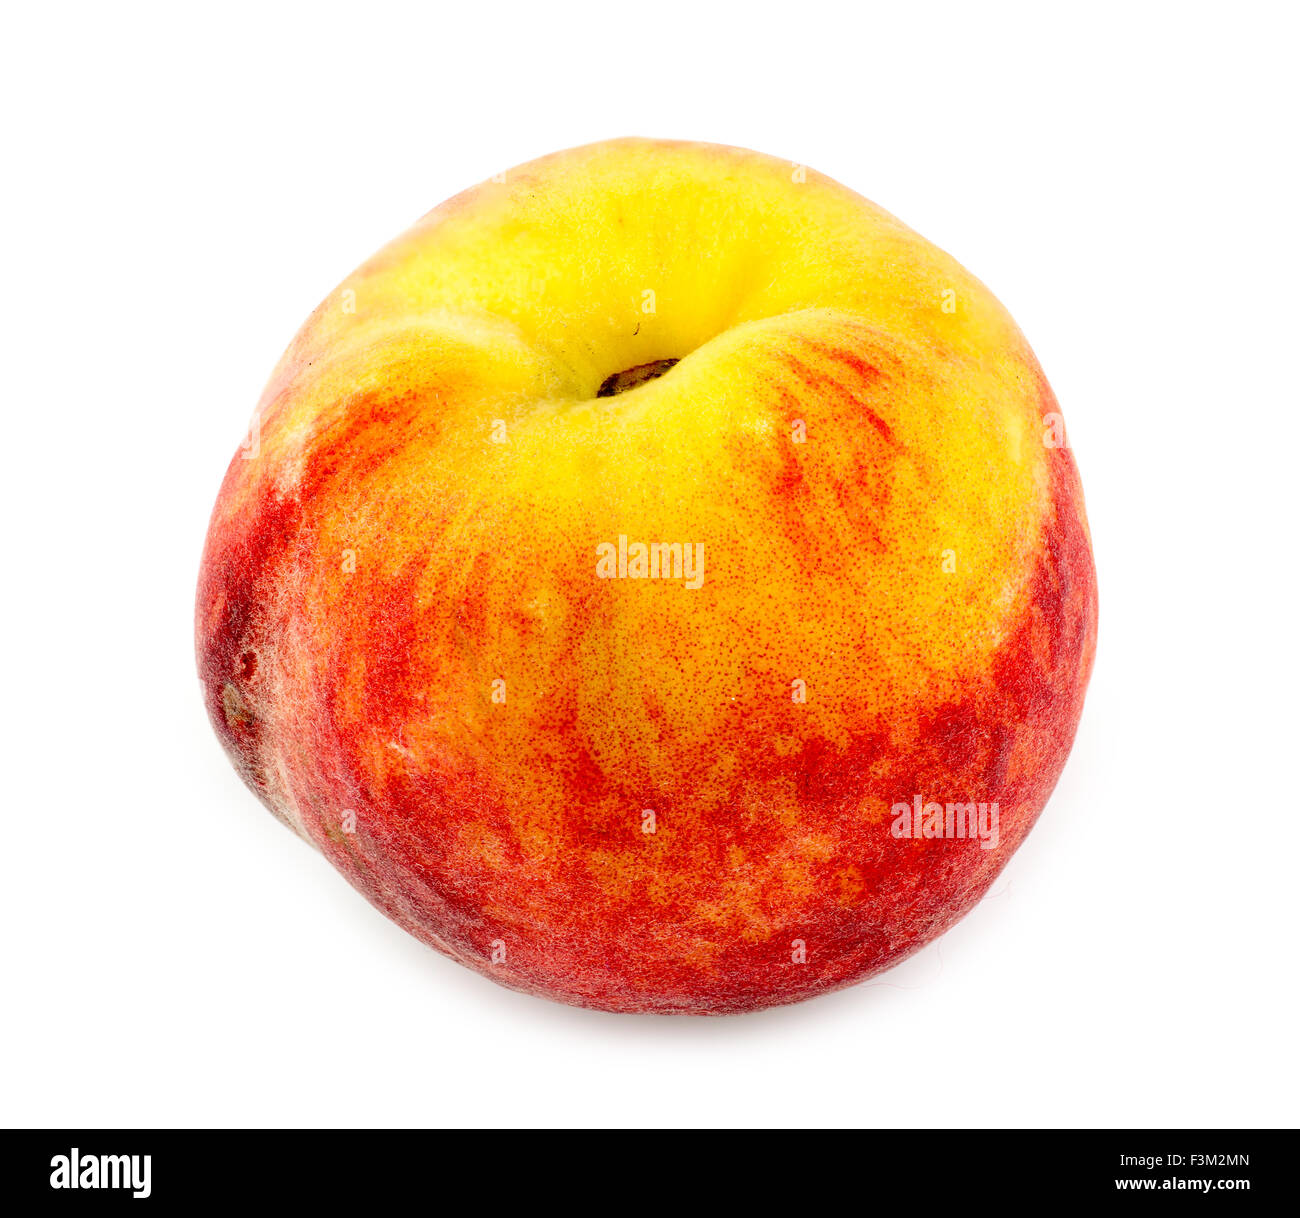 Plump, juicy peach isolated on white Stock Photo